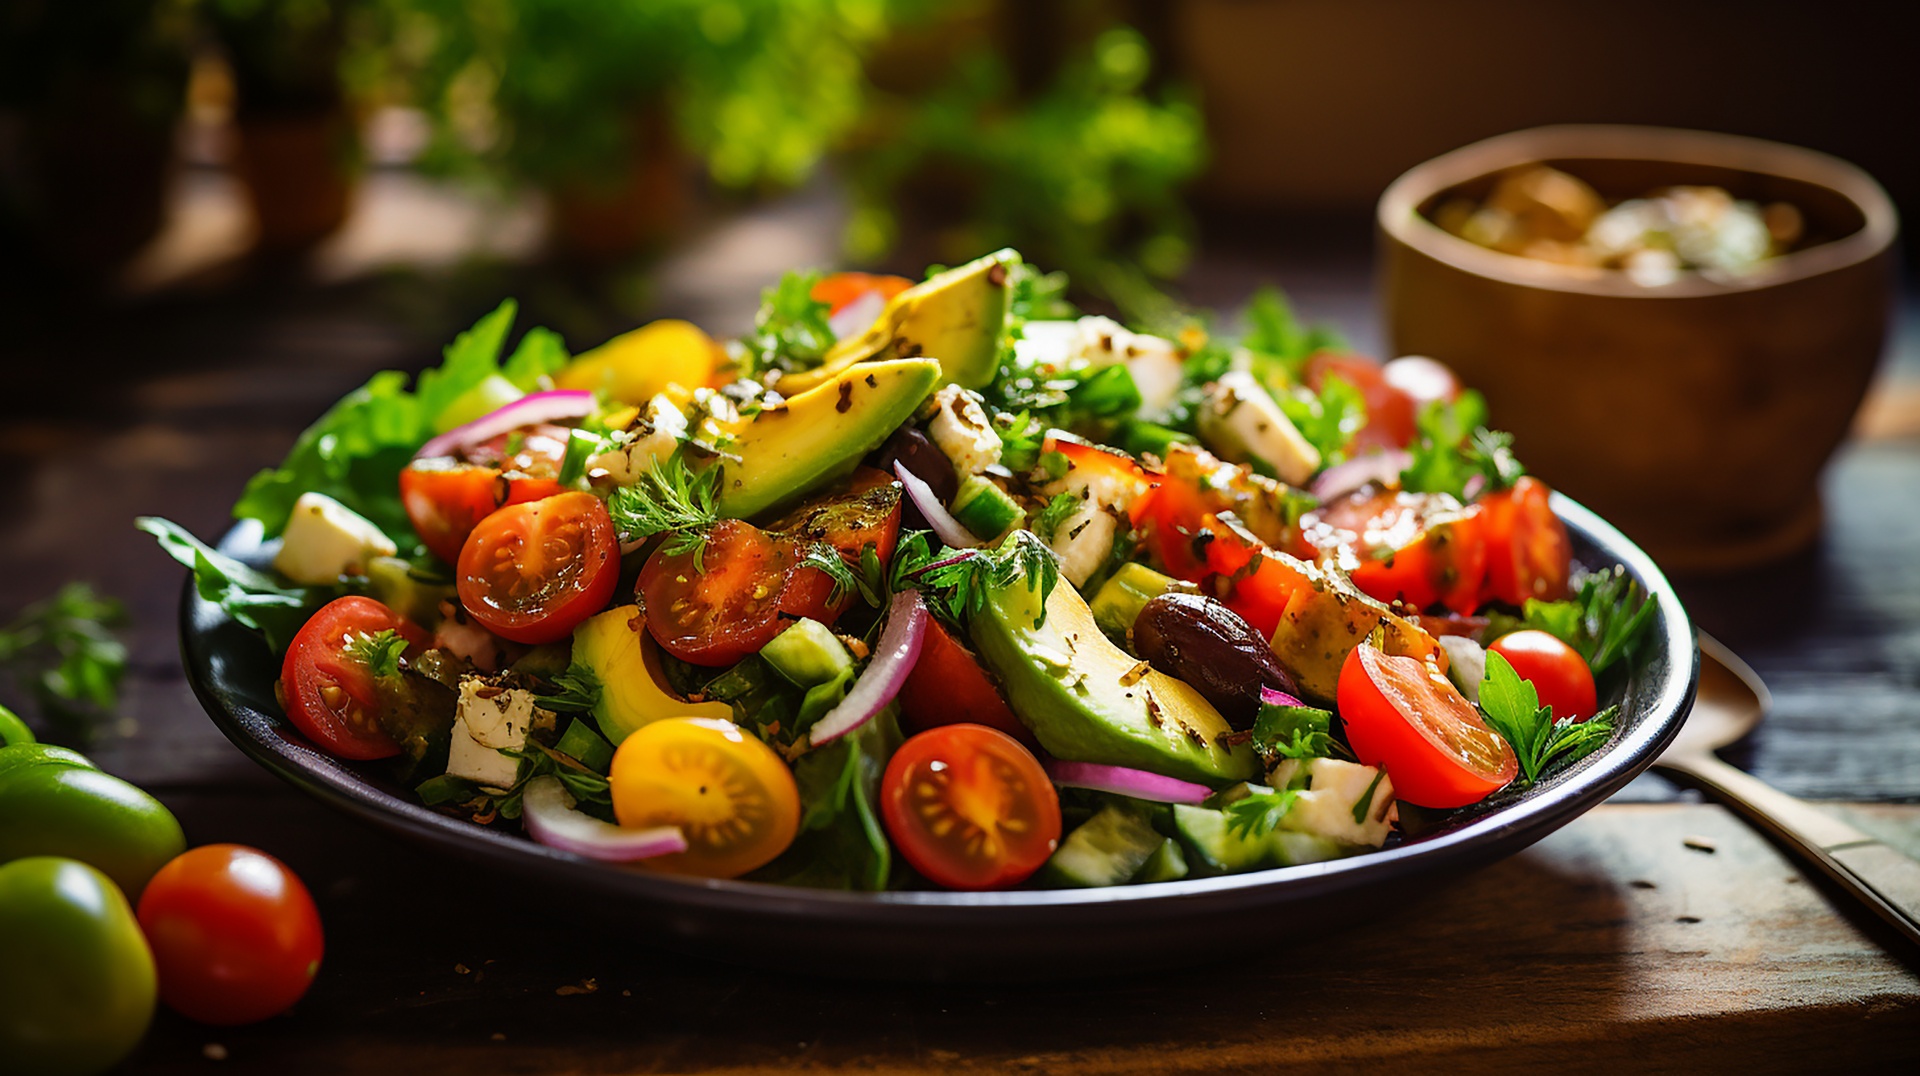 Healthy Salad On The Table Free Stock Photo - Public Domain Pictures